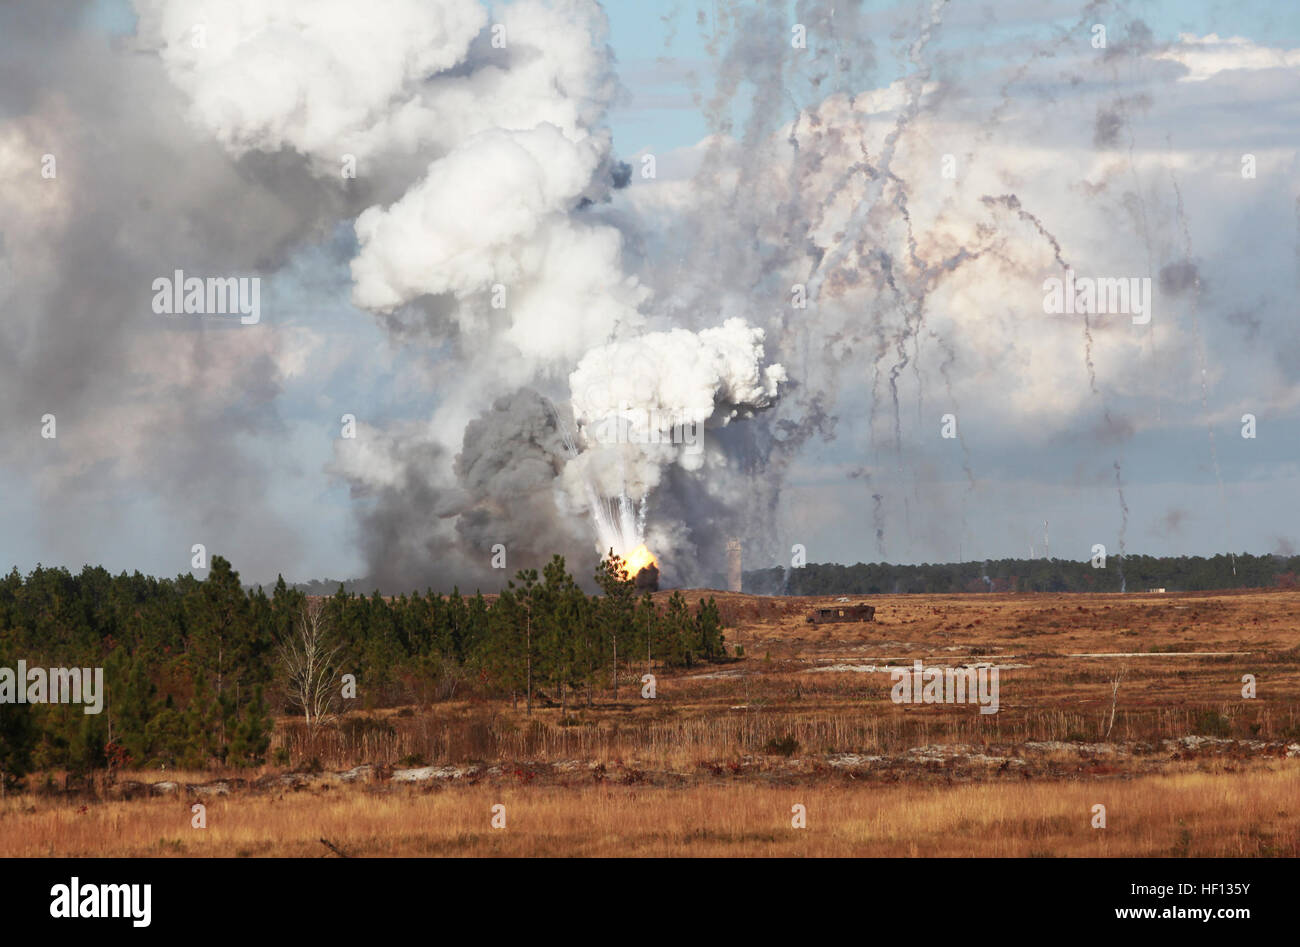 A mushroom cloud bursts into the air after the detonation of obsolete munitions by the Marines of Ammunition Company, 2nd Supply Battalion, 2nd Marine Logistics Group at a demolition range aboard Camp Lejeune, N.C., Dec. 4, 2012. The company detonated 17 separate caches of ordnance and destroyed damaged small-arms munitions in a burn pit filled with tinder and 35 gallons of diesel gasoline. Ammunition Marines clean house during demolition training 121204-M-DS159-229 Stock Photo